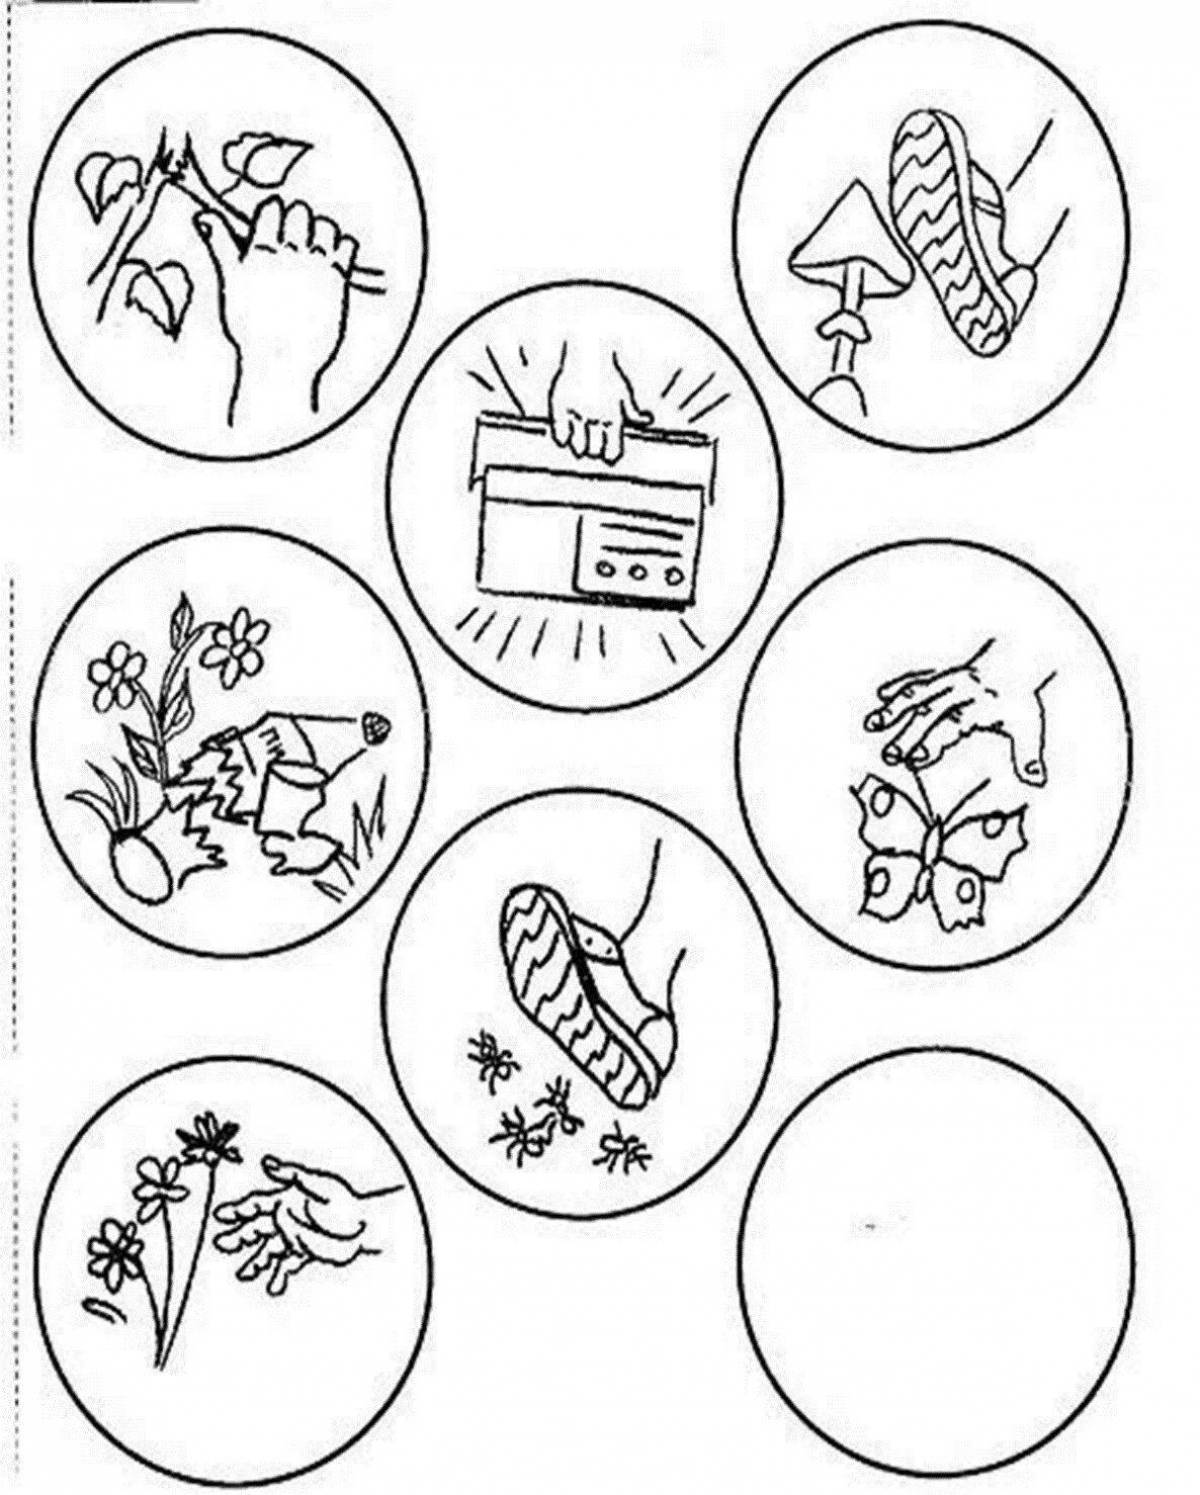 Coloring book excellent care of plants